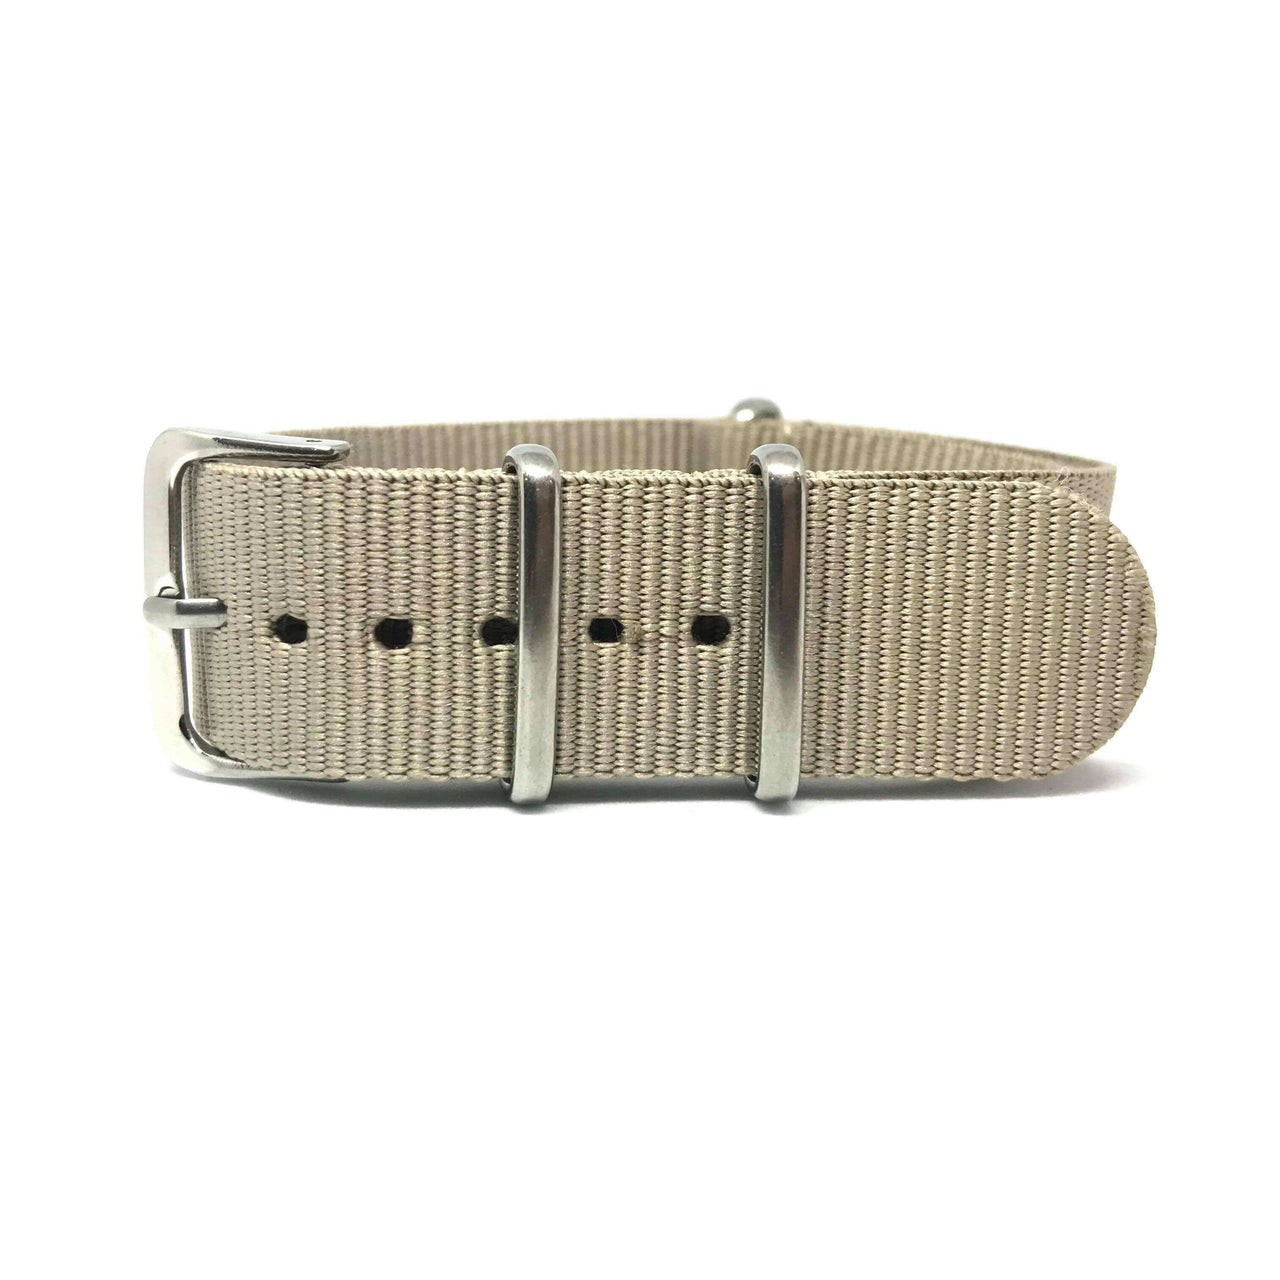 Classic Military Style Strap - Sand